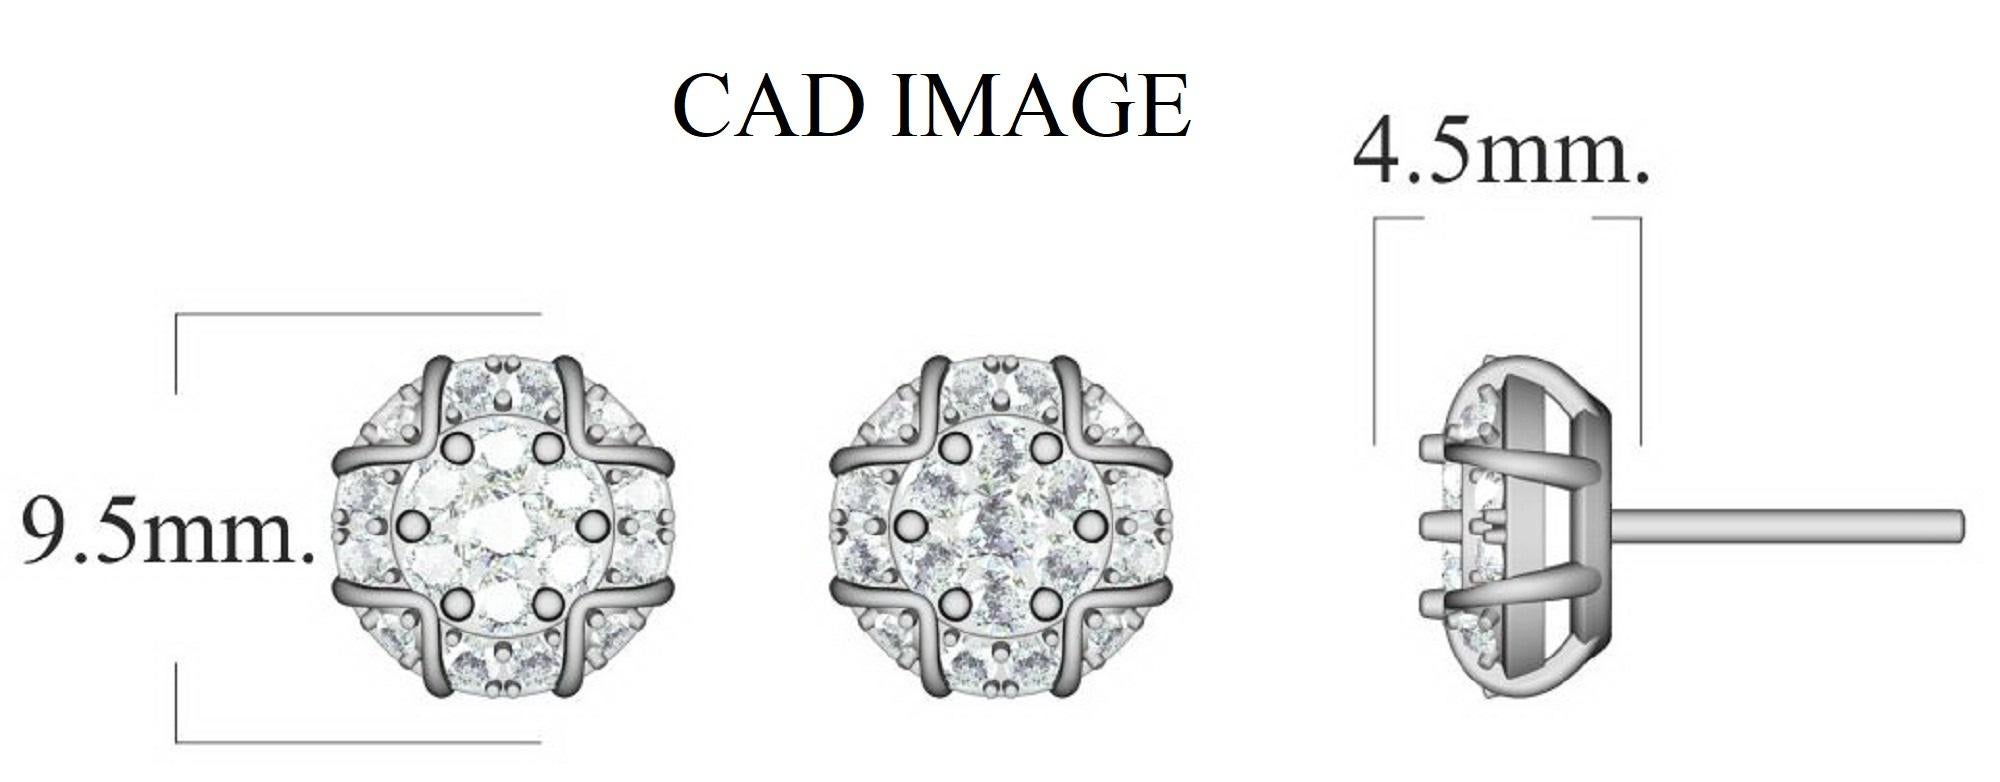 18 Karat White Gold cluster  Earrings With 38 Round Brilliant Diamonds timeless Diamond cluster stud earrings have 1.00 Carats of Round Brilliant set in pave, pressure and channel setting, H-I color I2 clarity. These sparkling post earrings secure